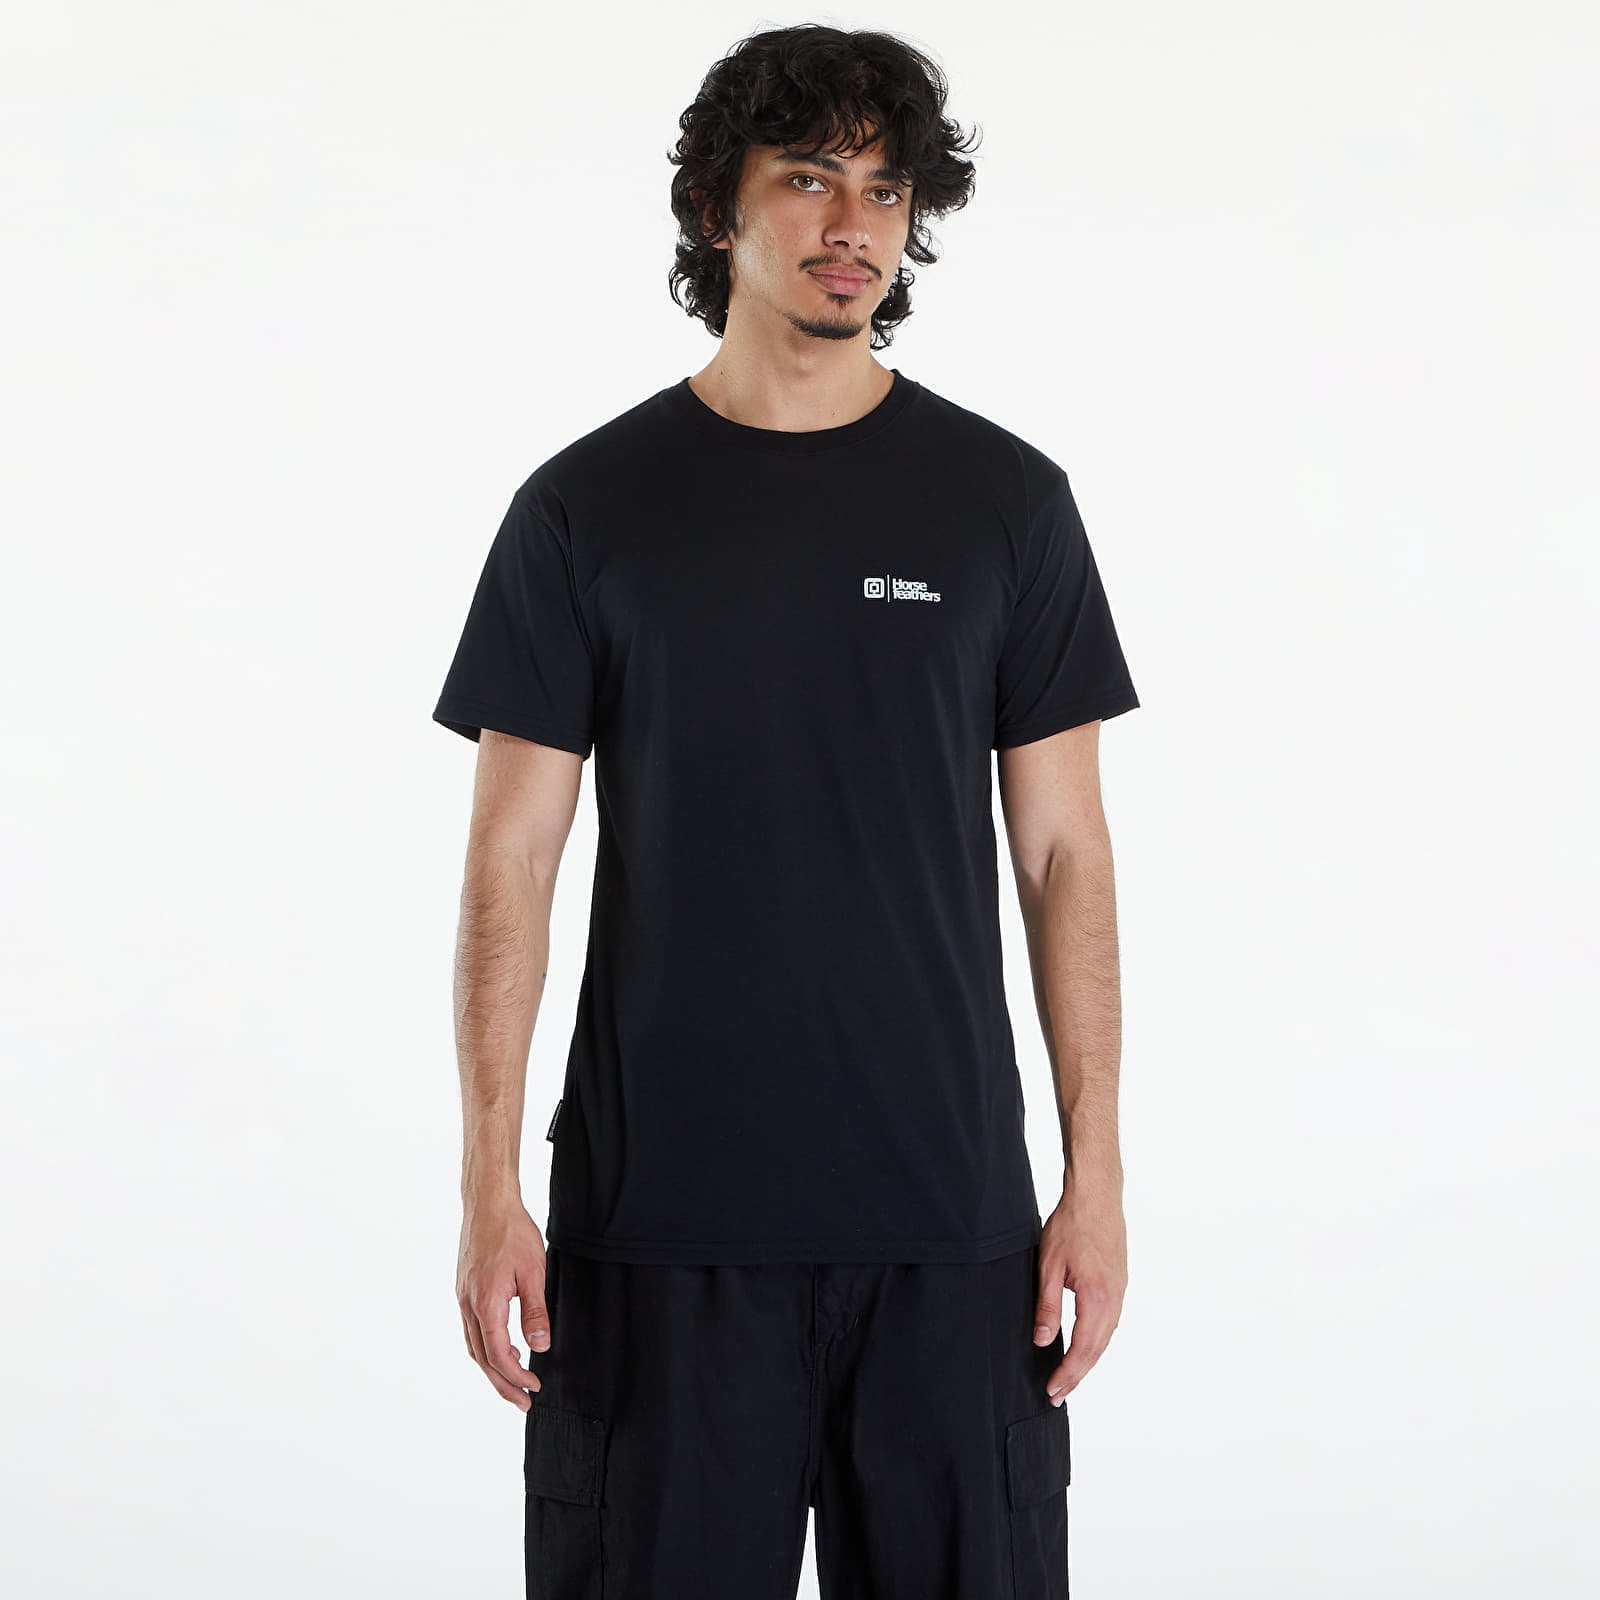 Rooter T-Shirt Black